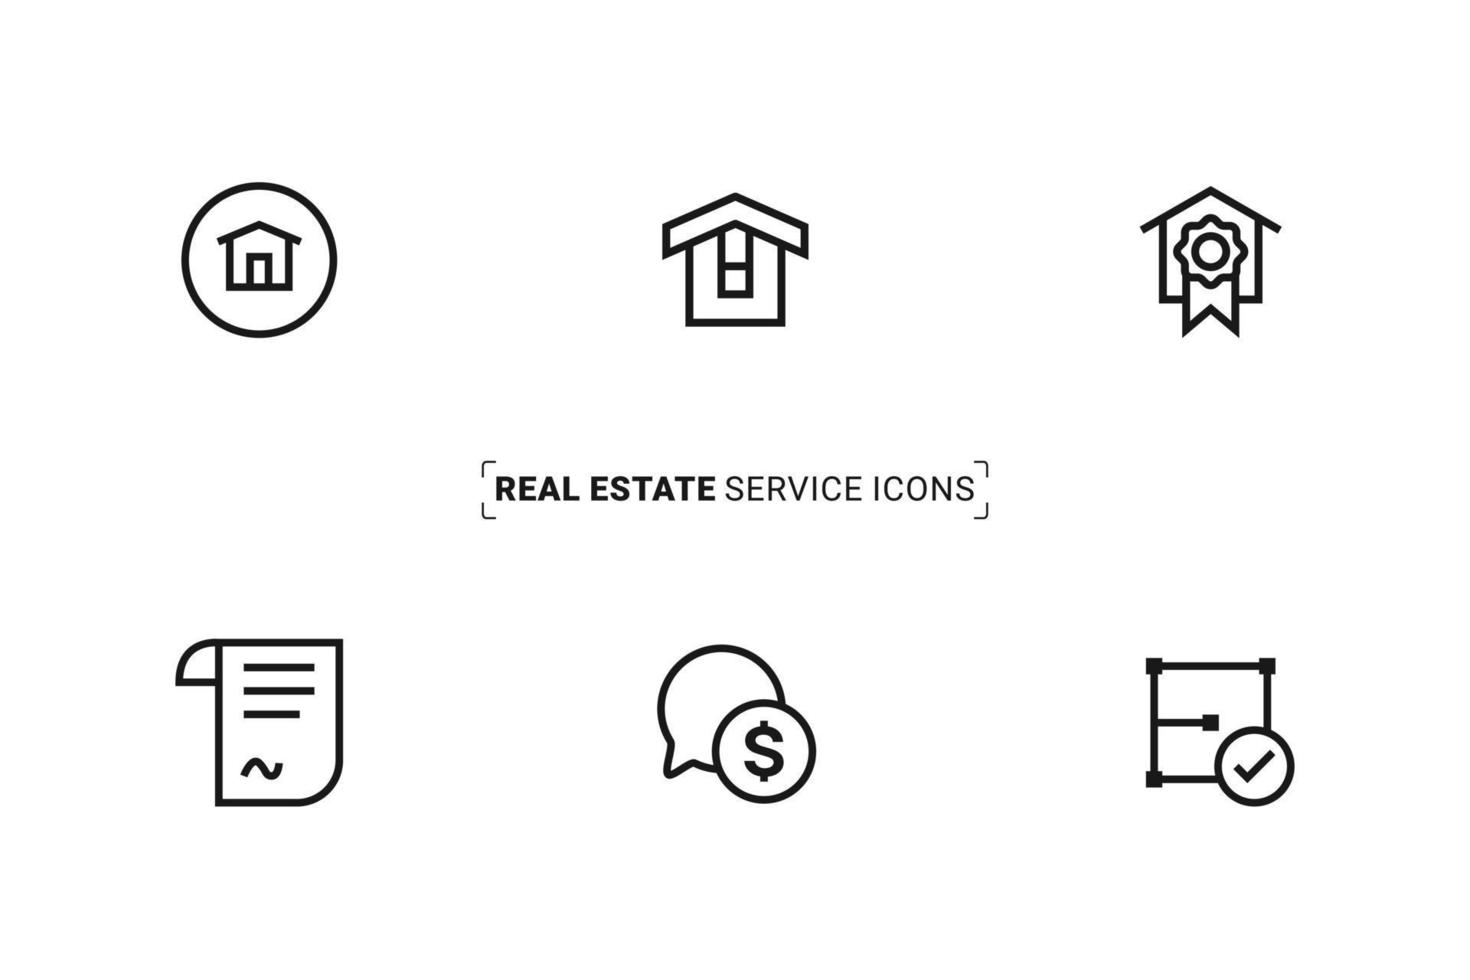 Home business icons for multipurpose use. For print and web design use. vector